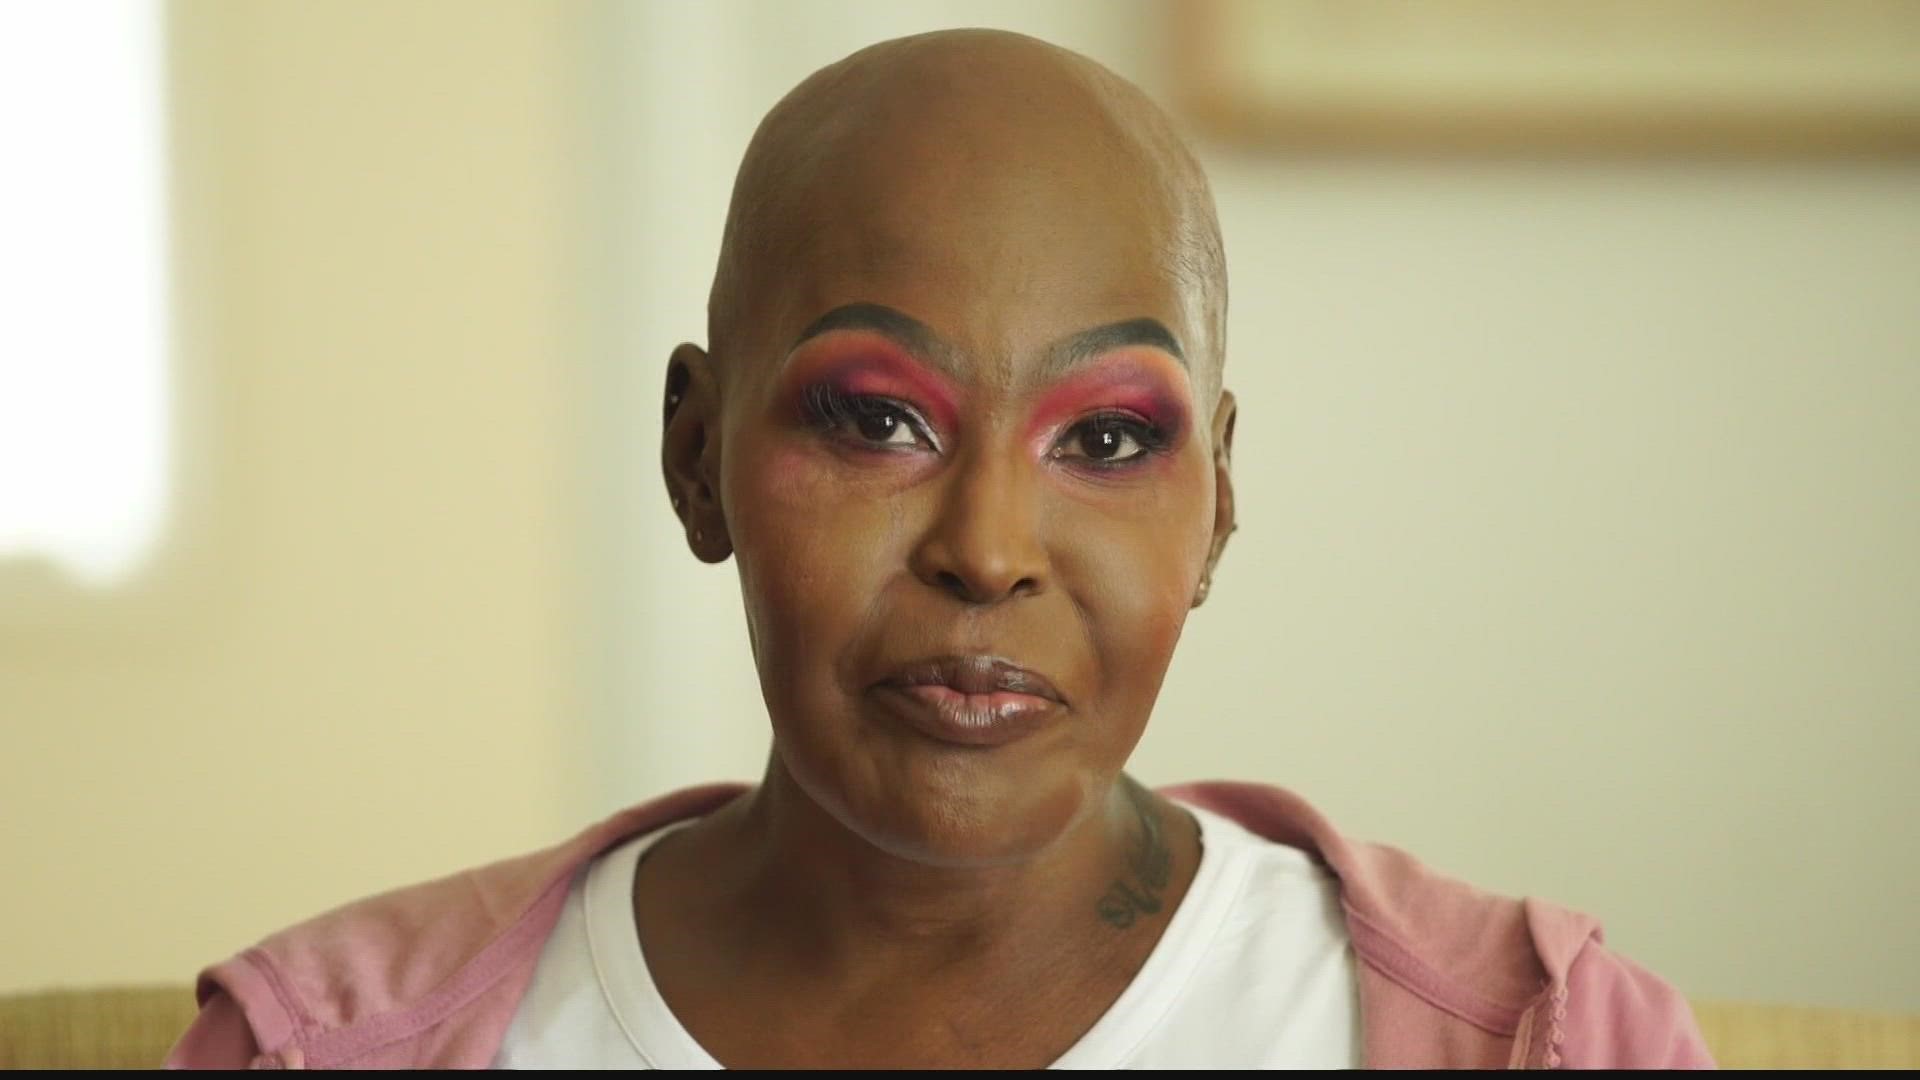 A Trans woman was homeless while facing a breast cancer diagnosis